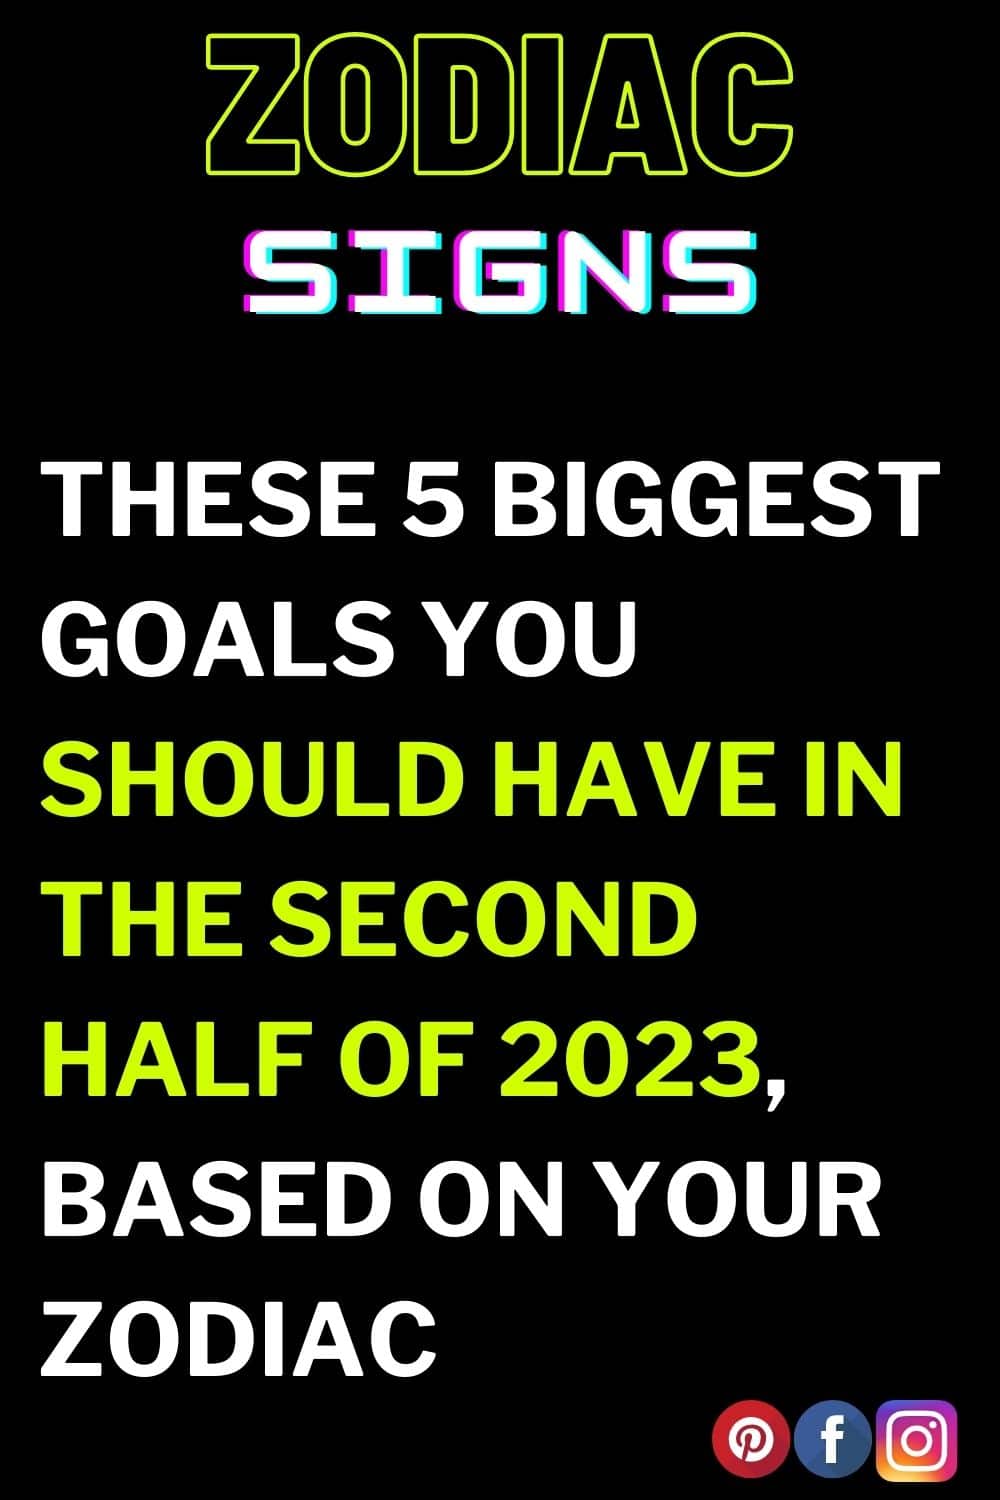 These 5 Biggest Goals You Should Have In The Second Half Of 2023, Based On Your Zodiac